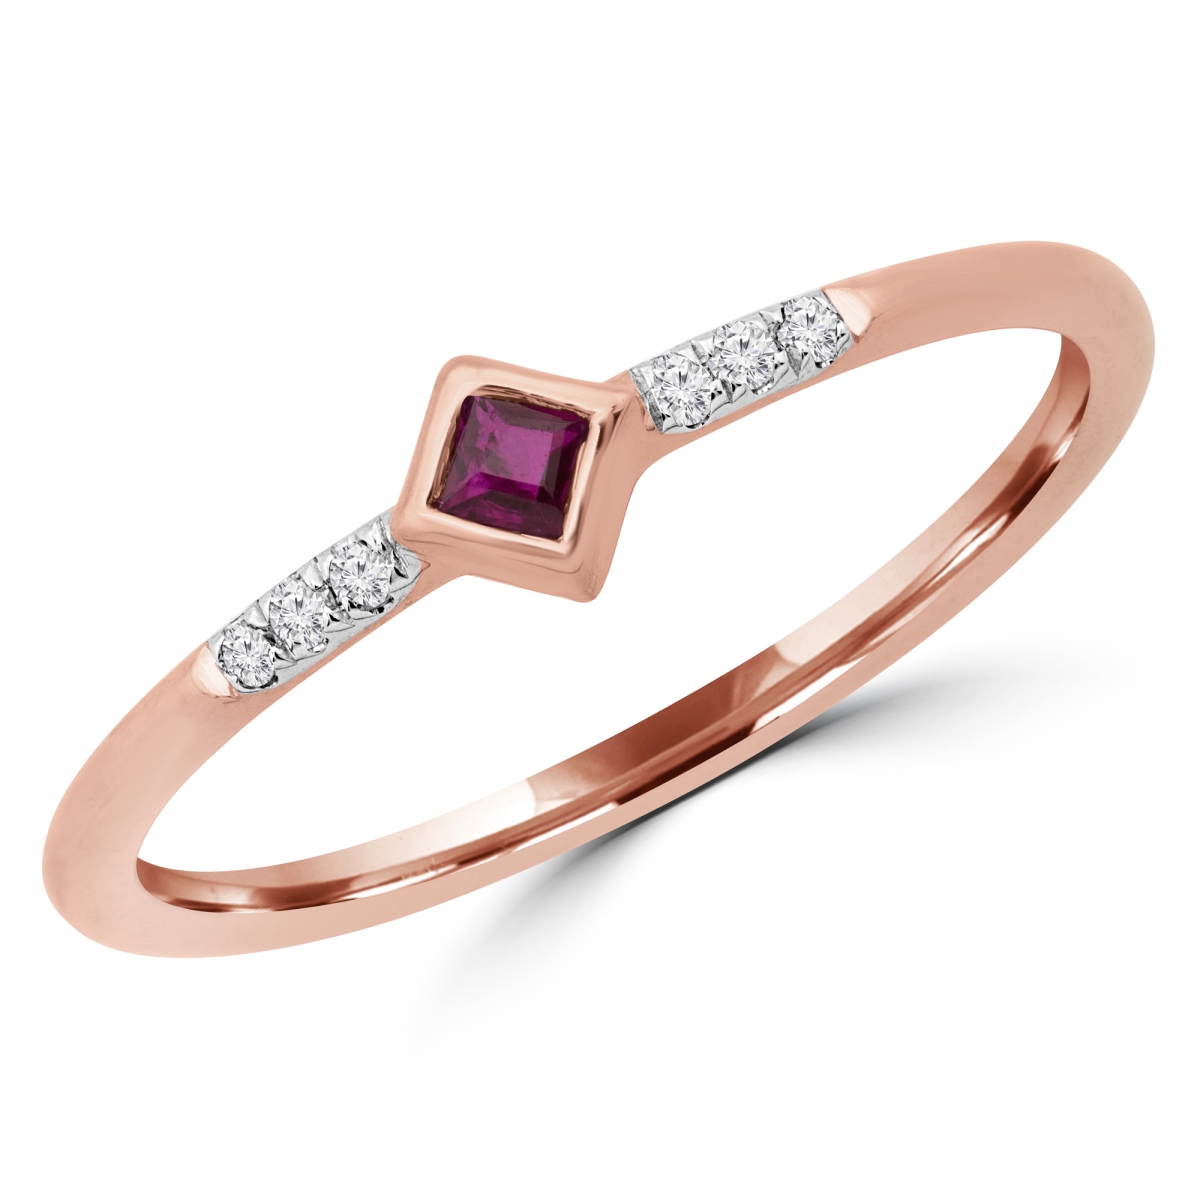 MDR190078-8.5 0.1 CTW Round Red Ruby Bezel Set Cocktail Ring in 14K Rose Gold - Size 8.5